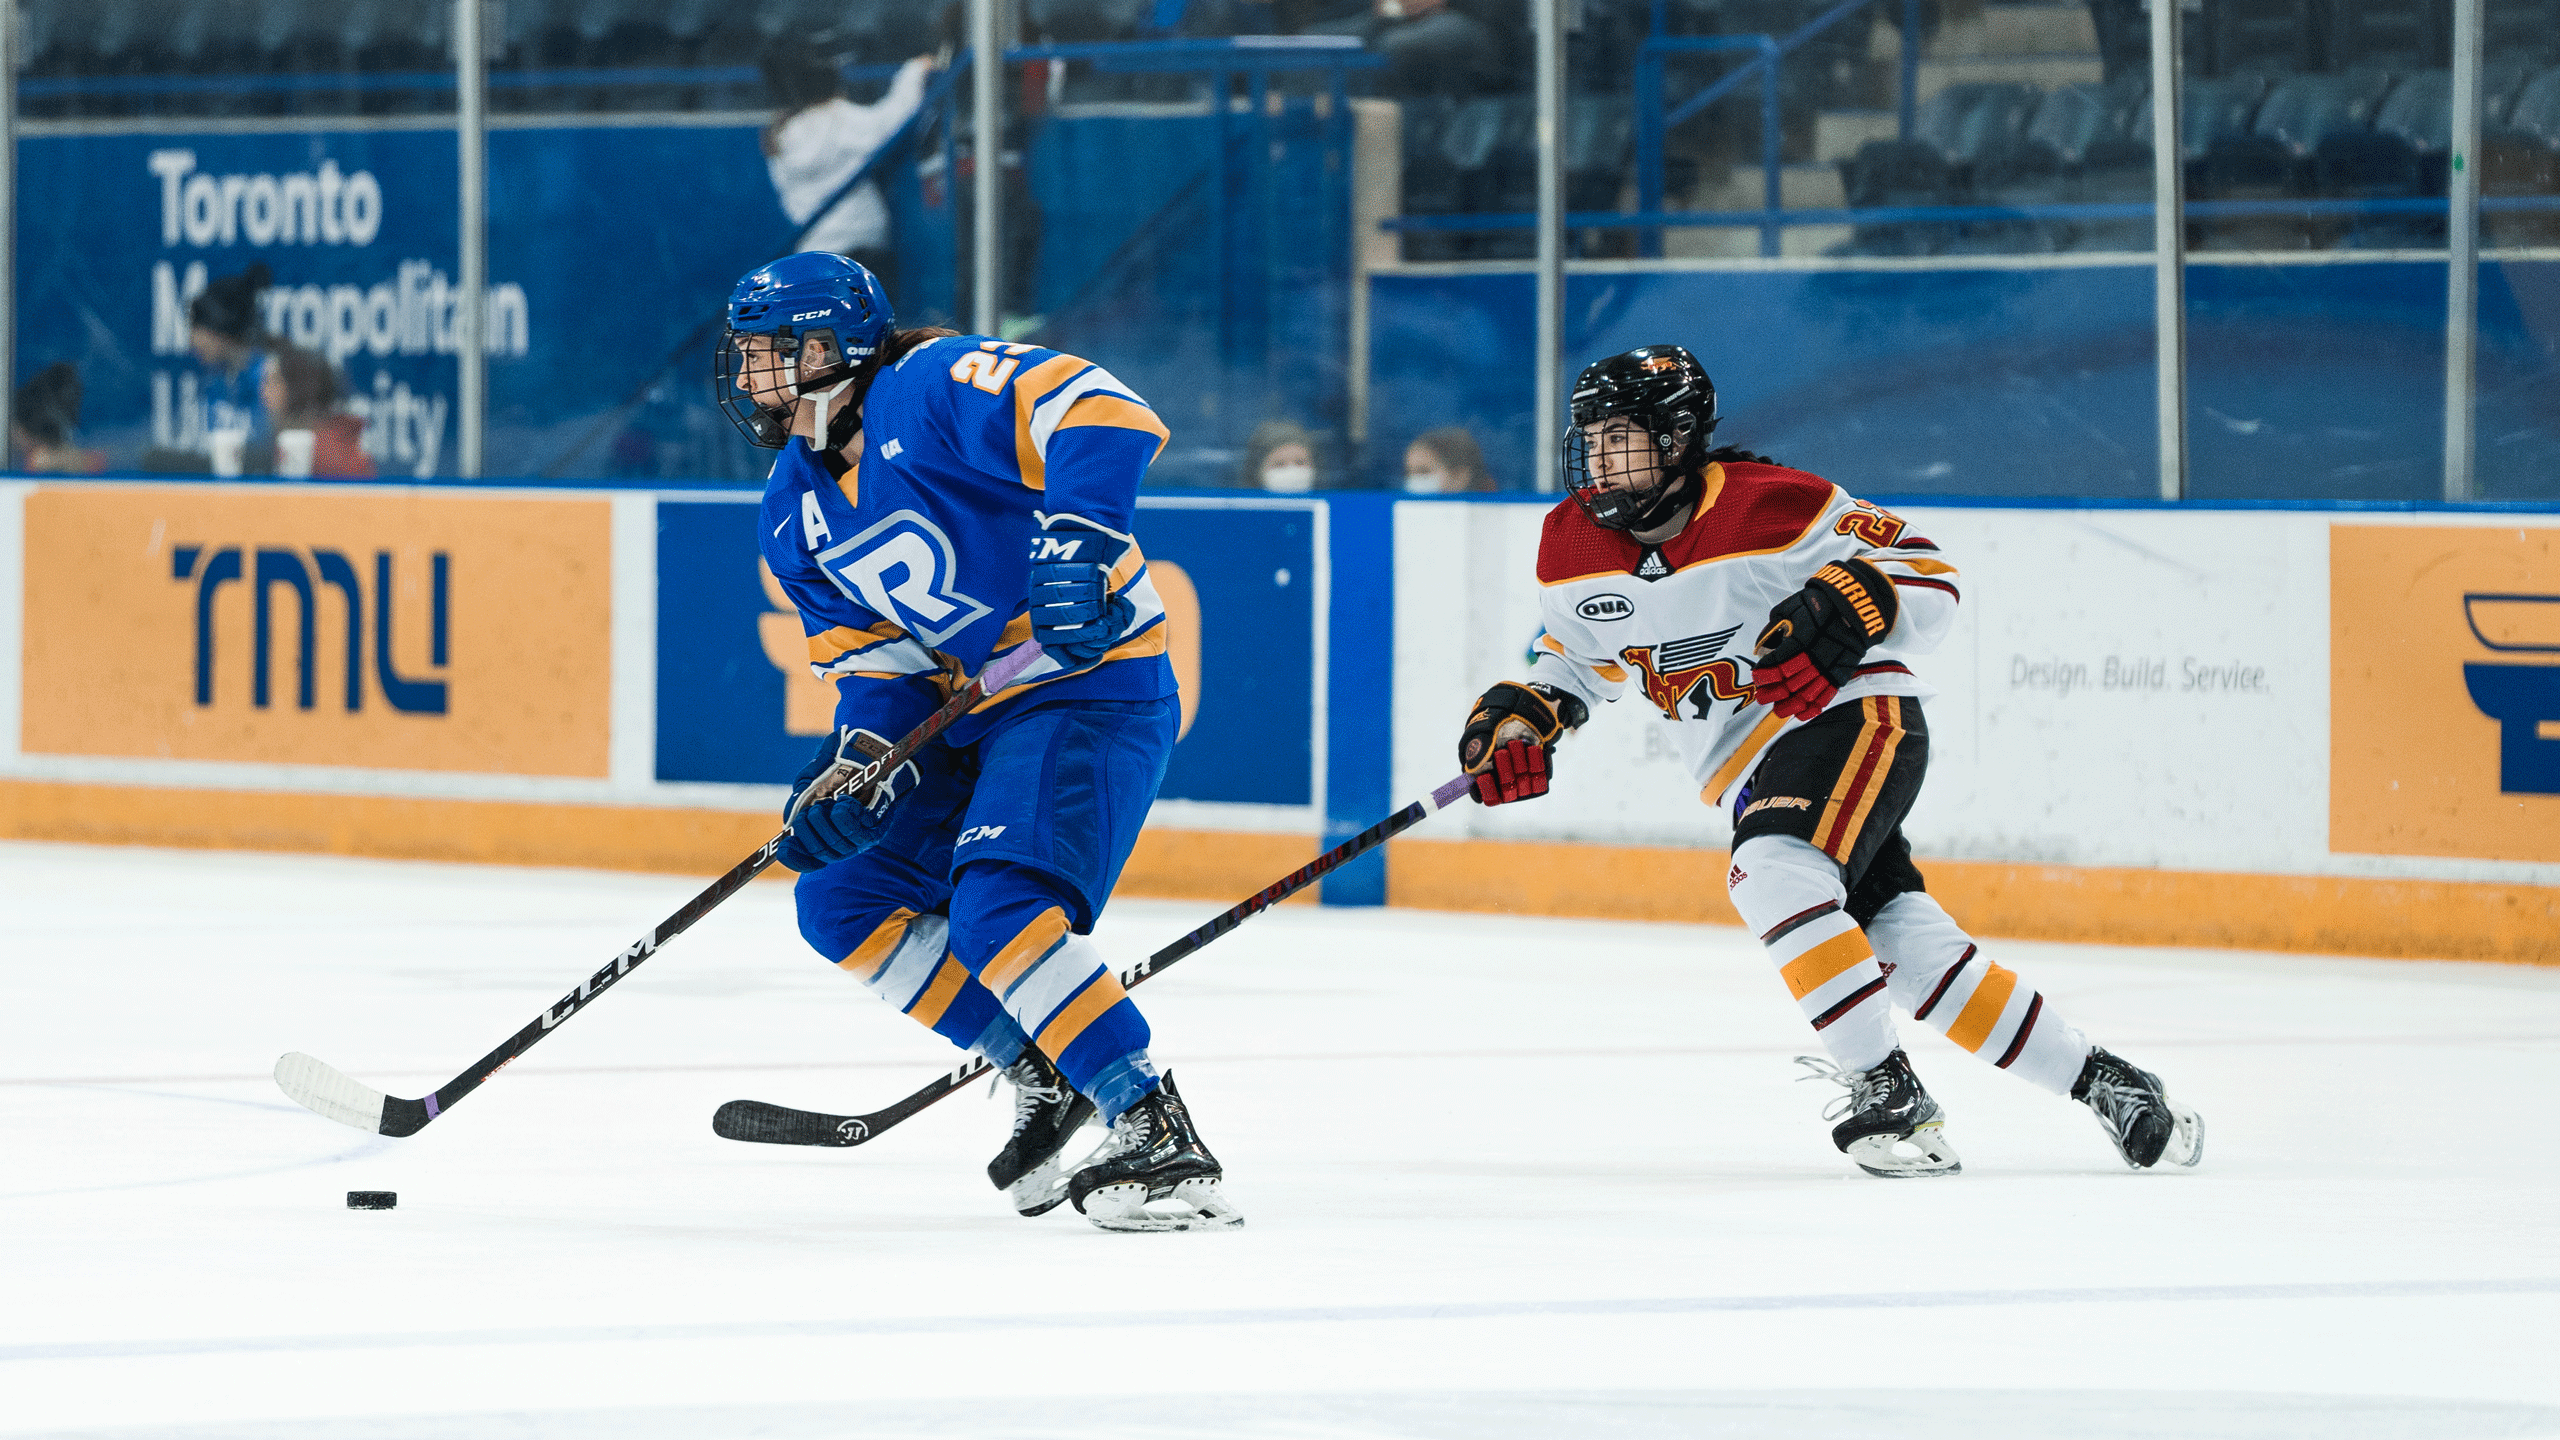 A hockey player in a blue jersey skates with the puck